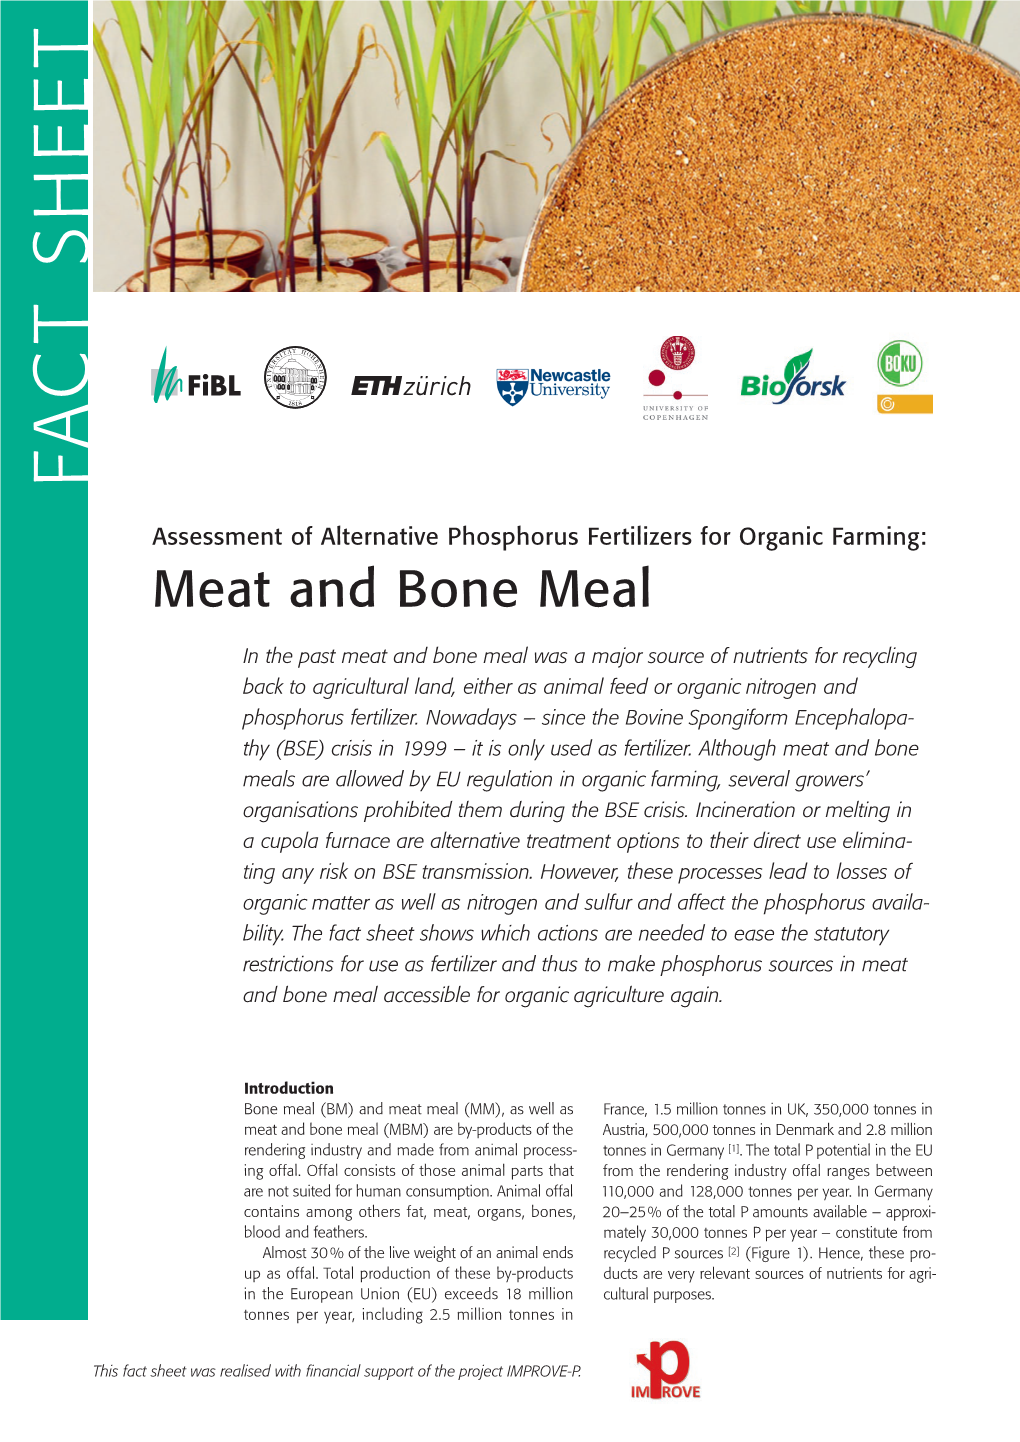 Assessment of Alternative Phosphorus Fertilizers for Organic Farming: Meat and Bone Meal